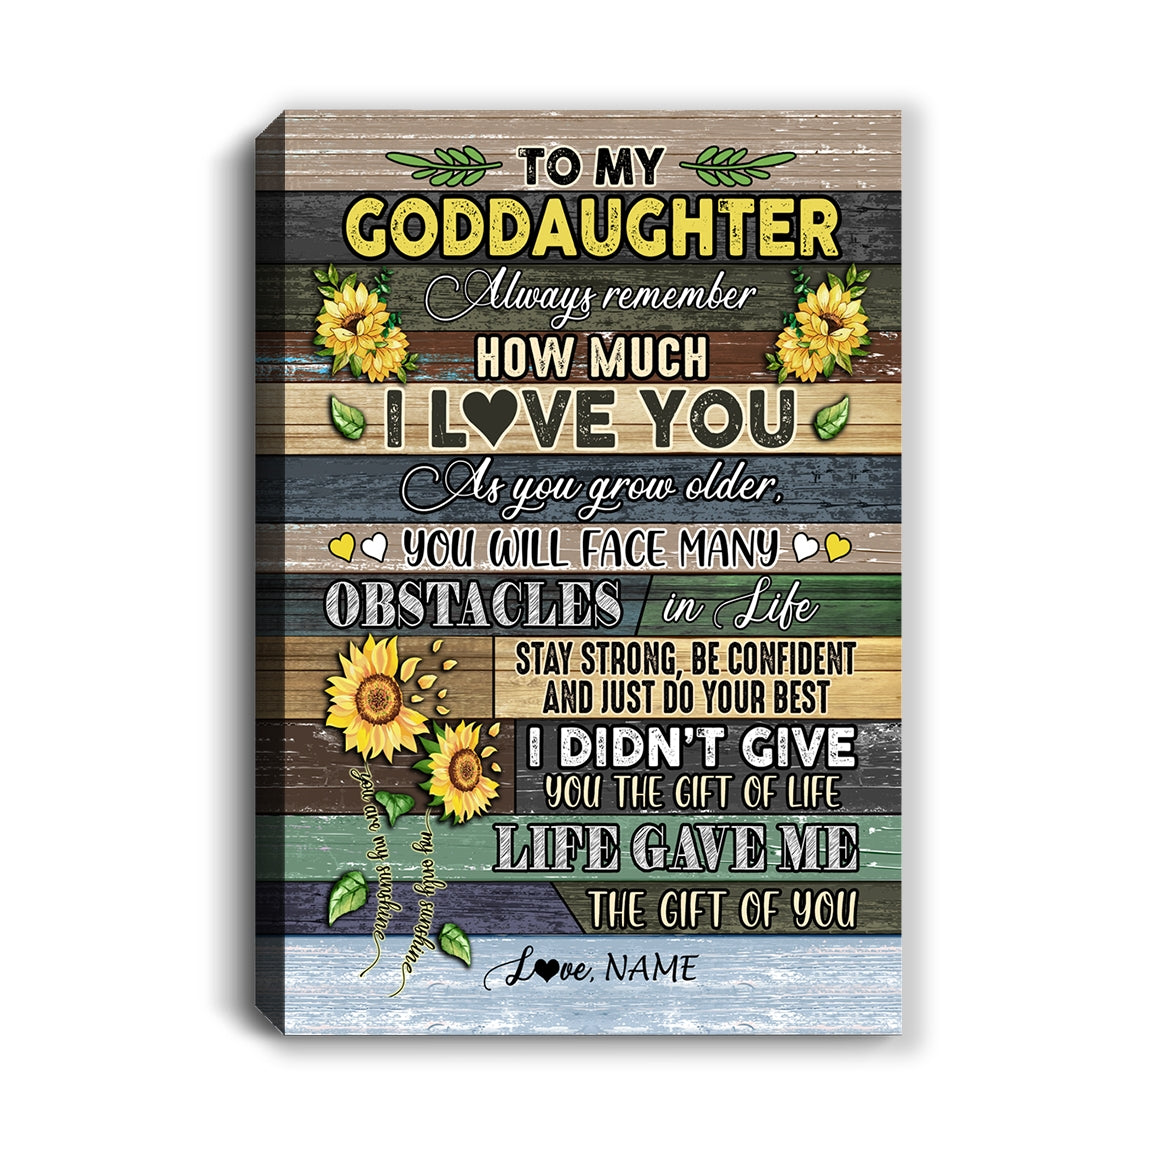 Personalized_To_My_Goddaughter_Canvas_From_Godmother_Always_Remember_How_Much_I_Love_You_Wood_Sunflower_Goddaughter_Birthday_Custom_Wall_Art_Print_Home_Decor_Framed_Canvas_Canvas_mock-1.jpg